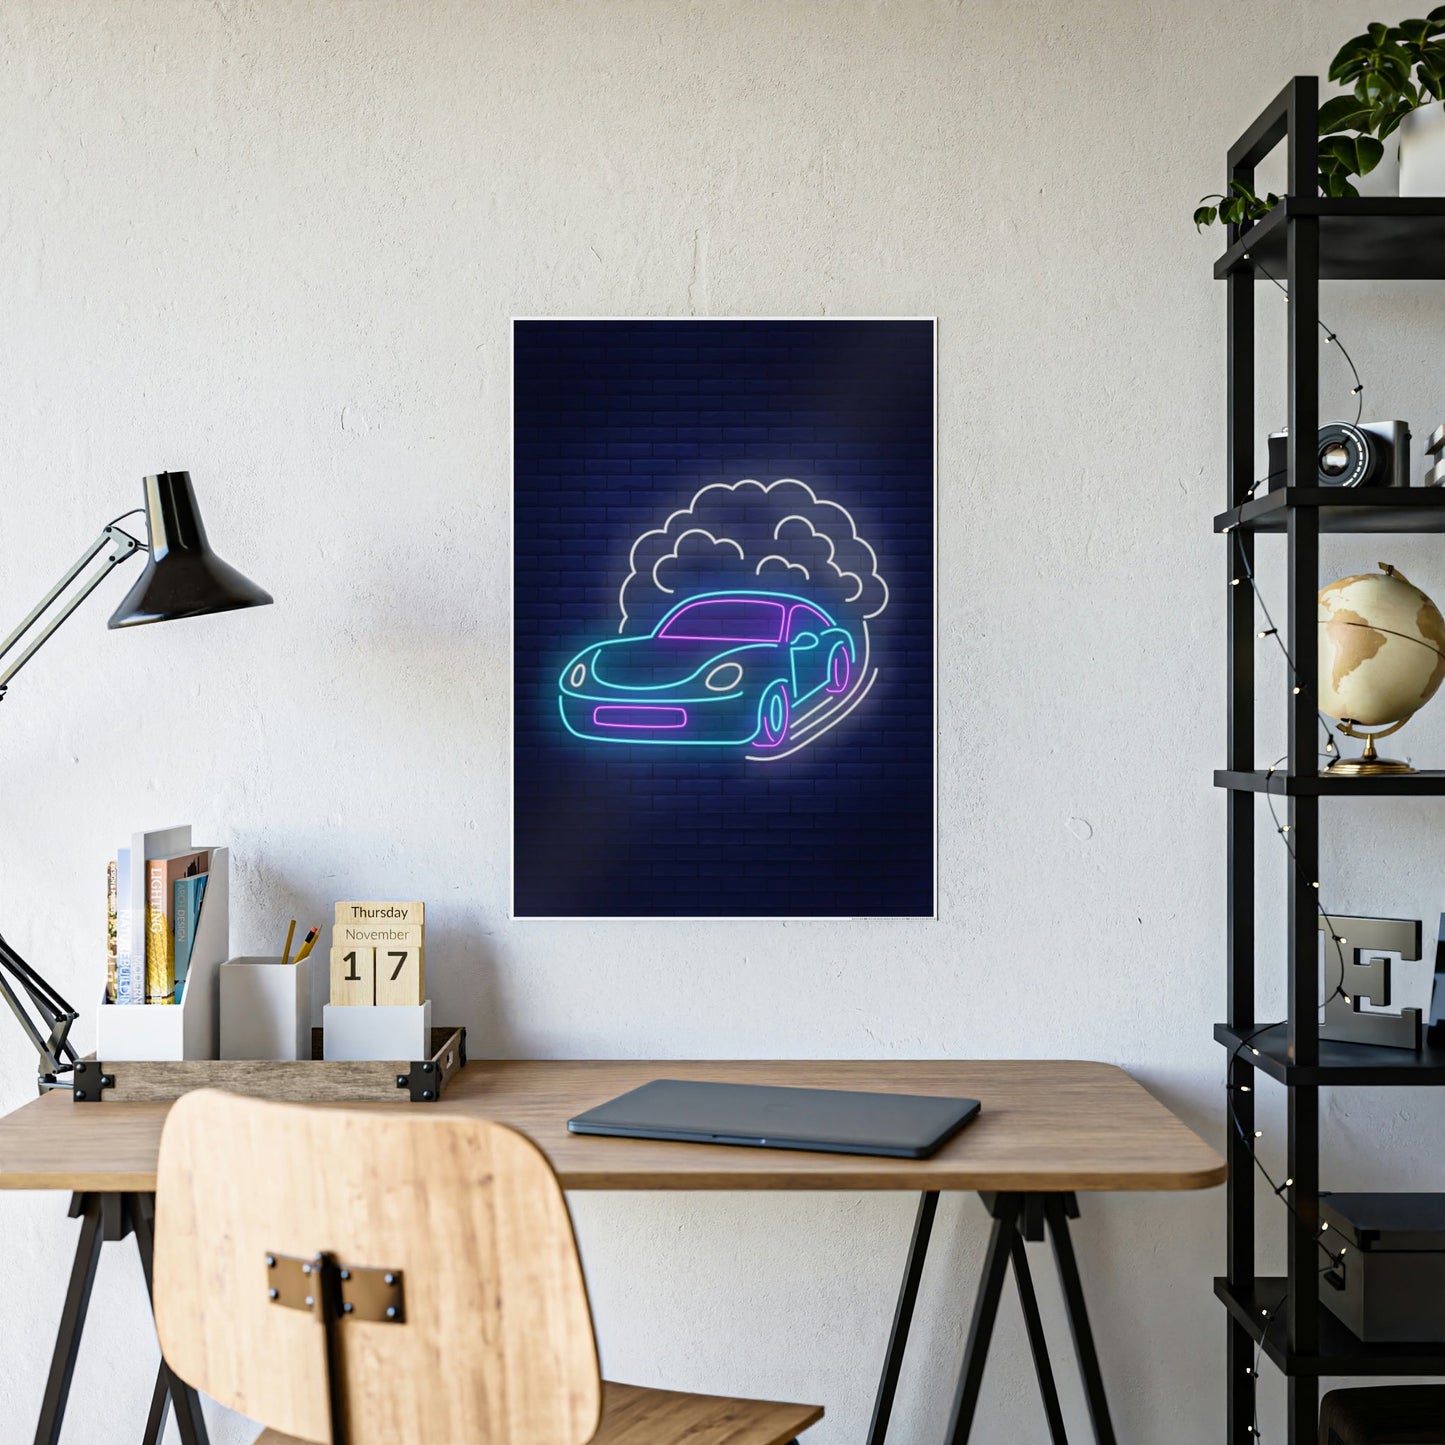 Luminous Landscapes Awakened: Neon-inspired Canvas Prints for Striking Wall Decor